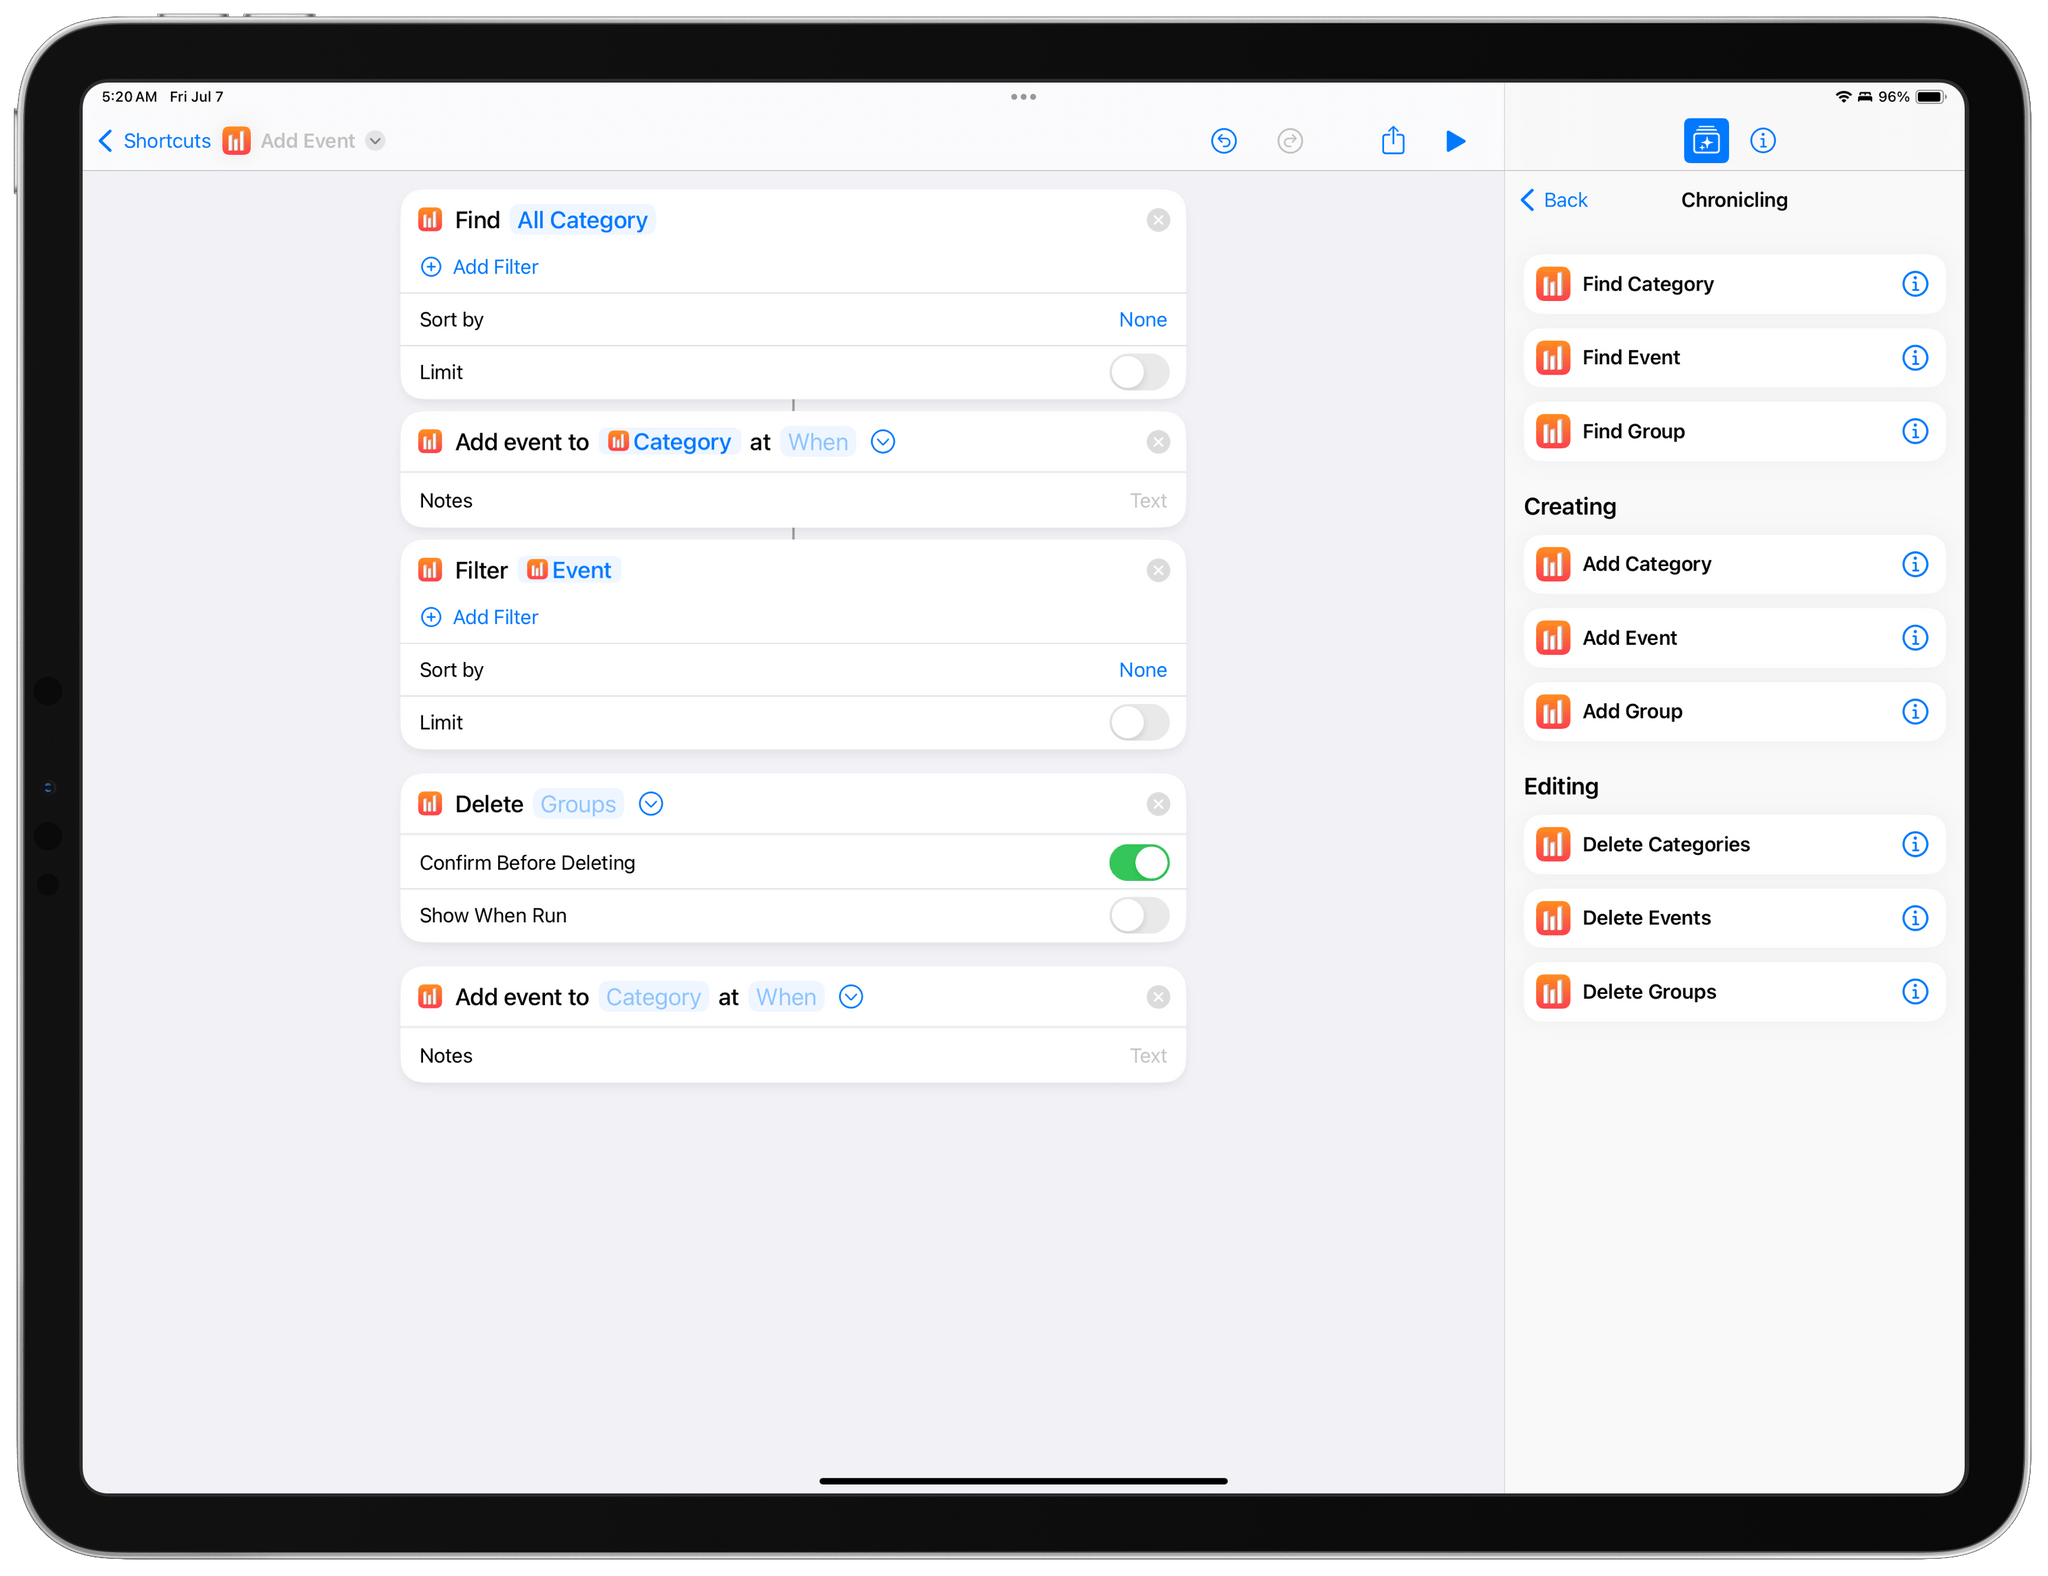 Examples of some of Chronicling's Shortcuts actions.